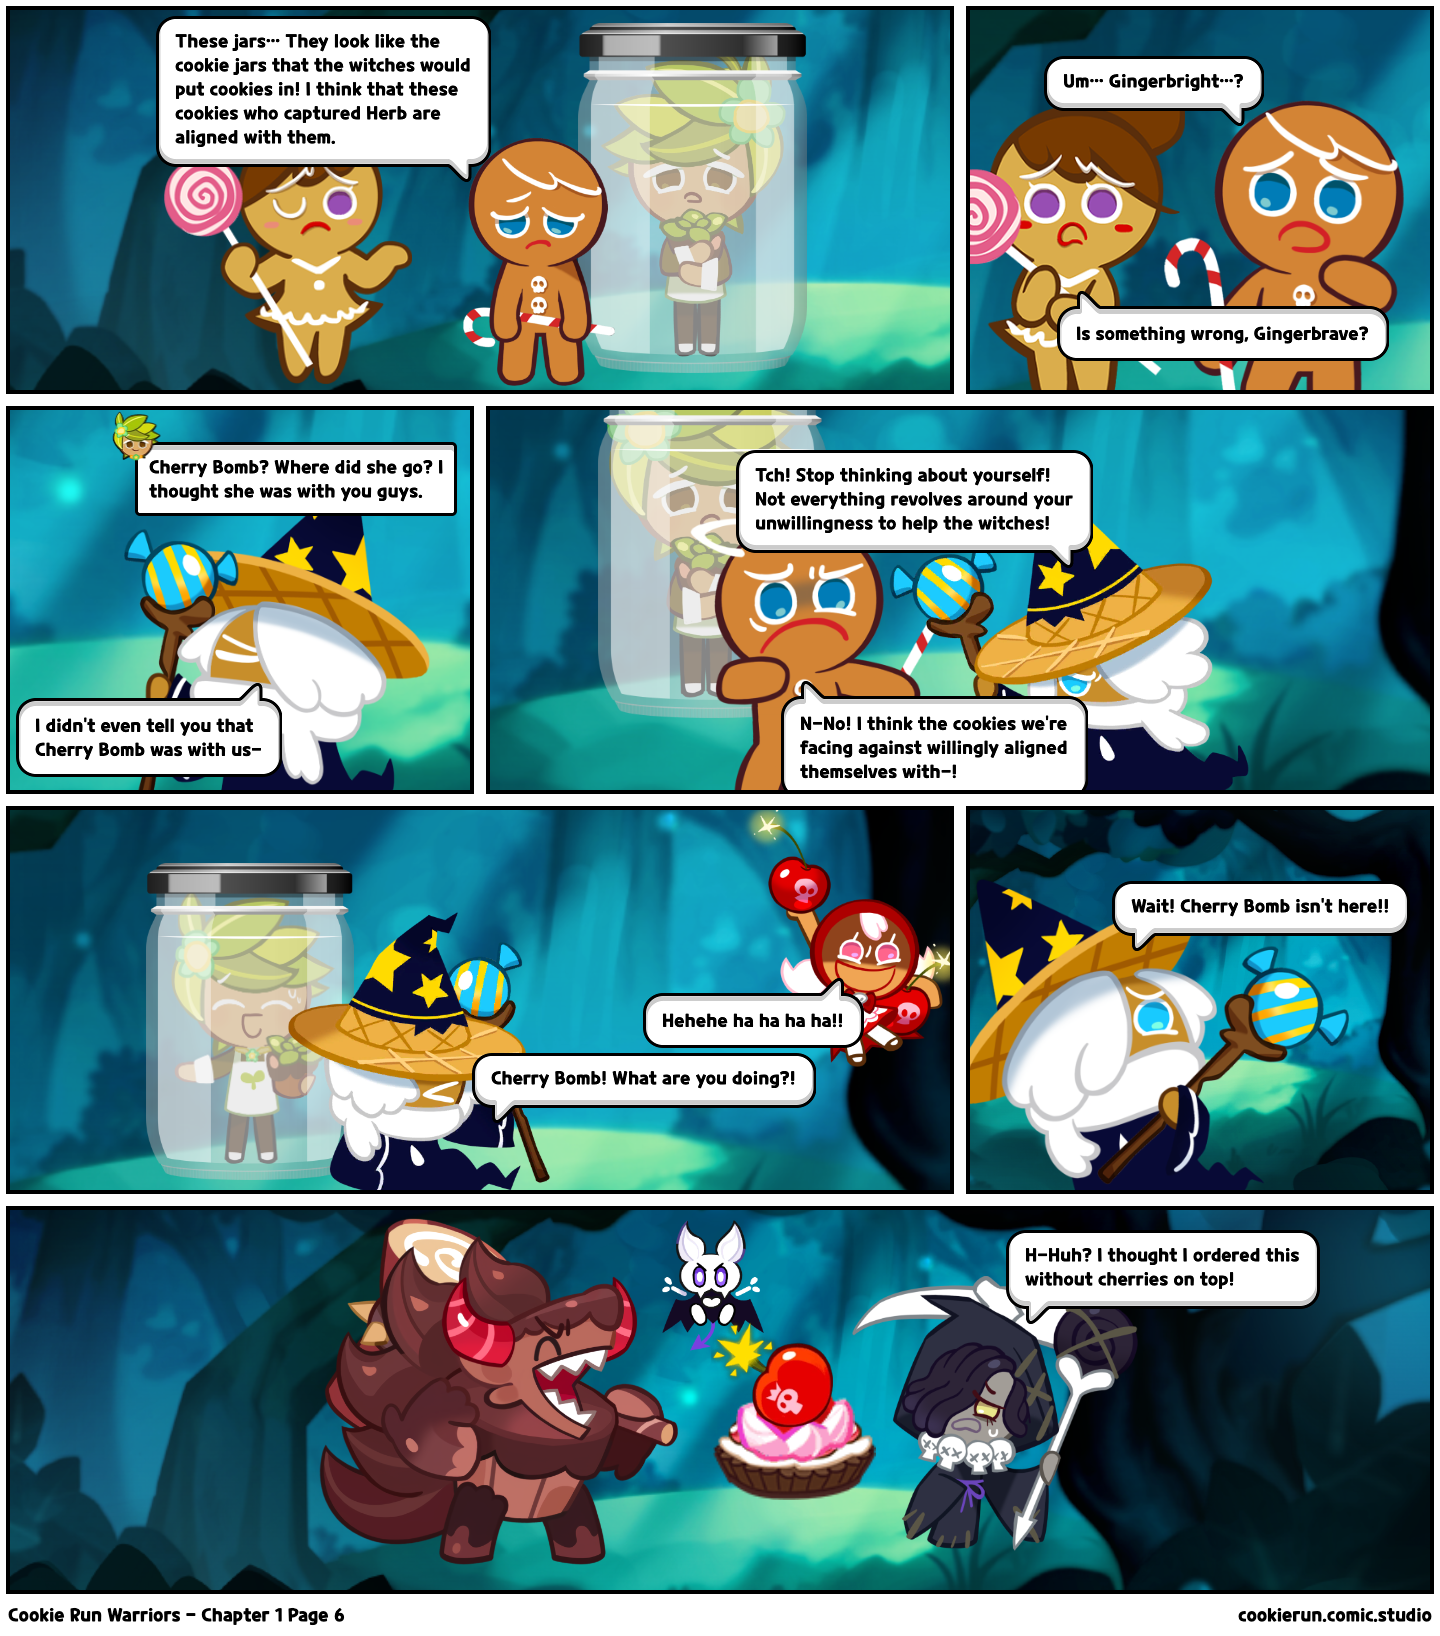 Cookie Run Warriors - Chapter 1 Page 6